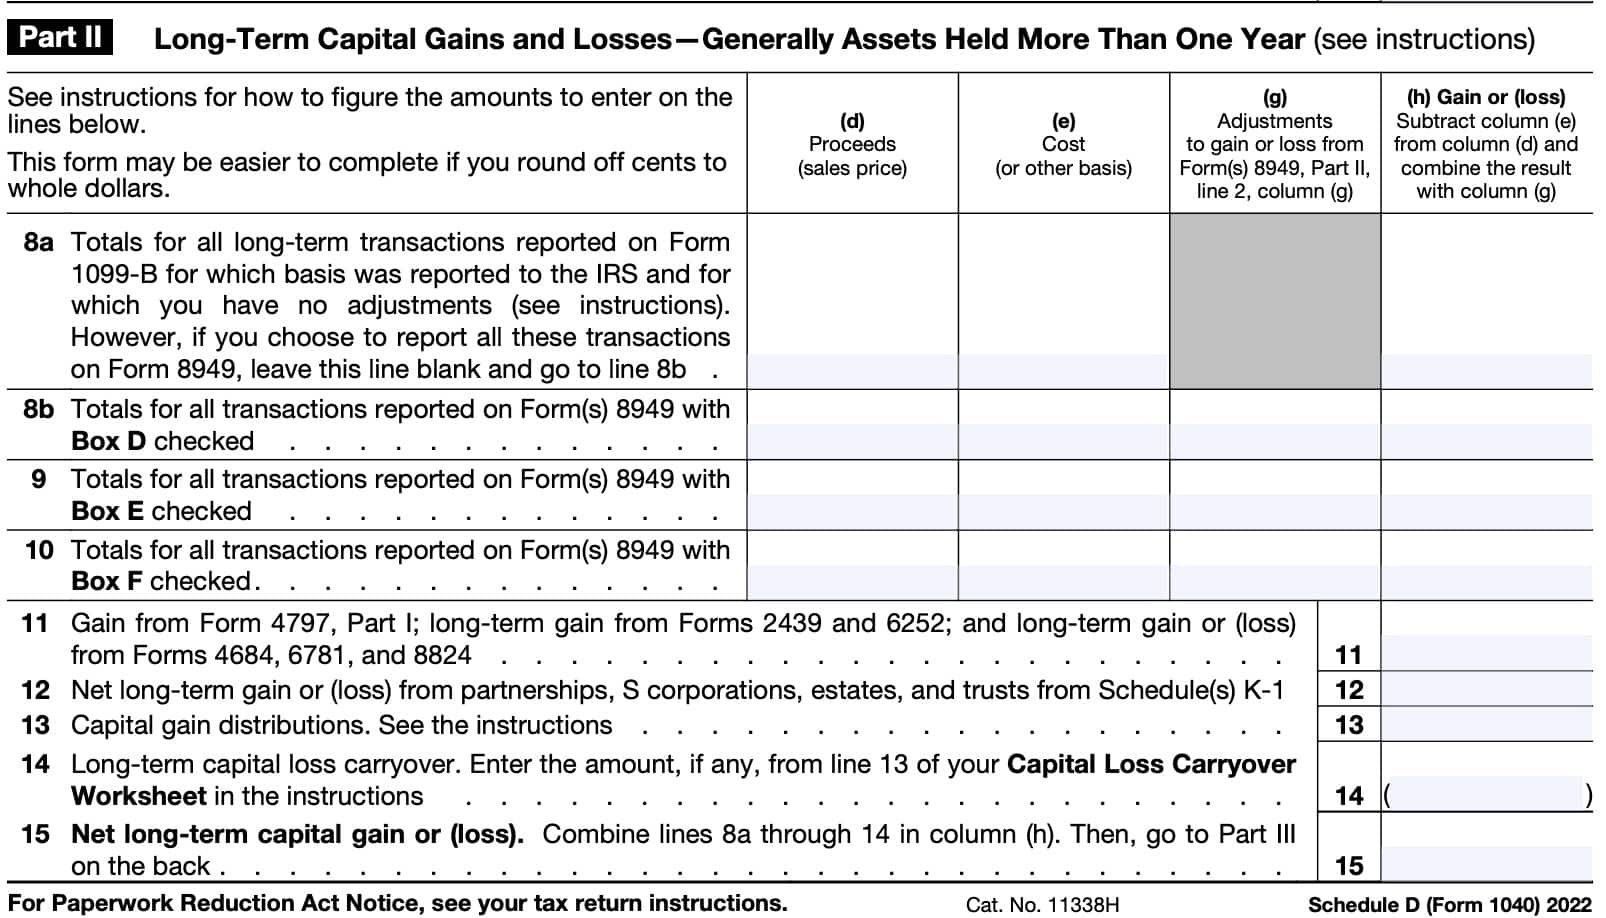 IRS Schedule D, Part II: Long-term capital gains and losses